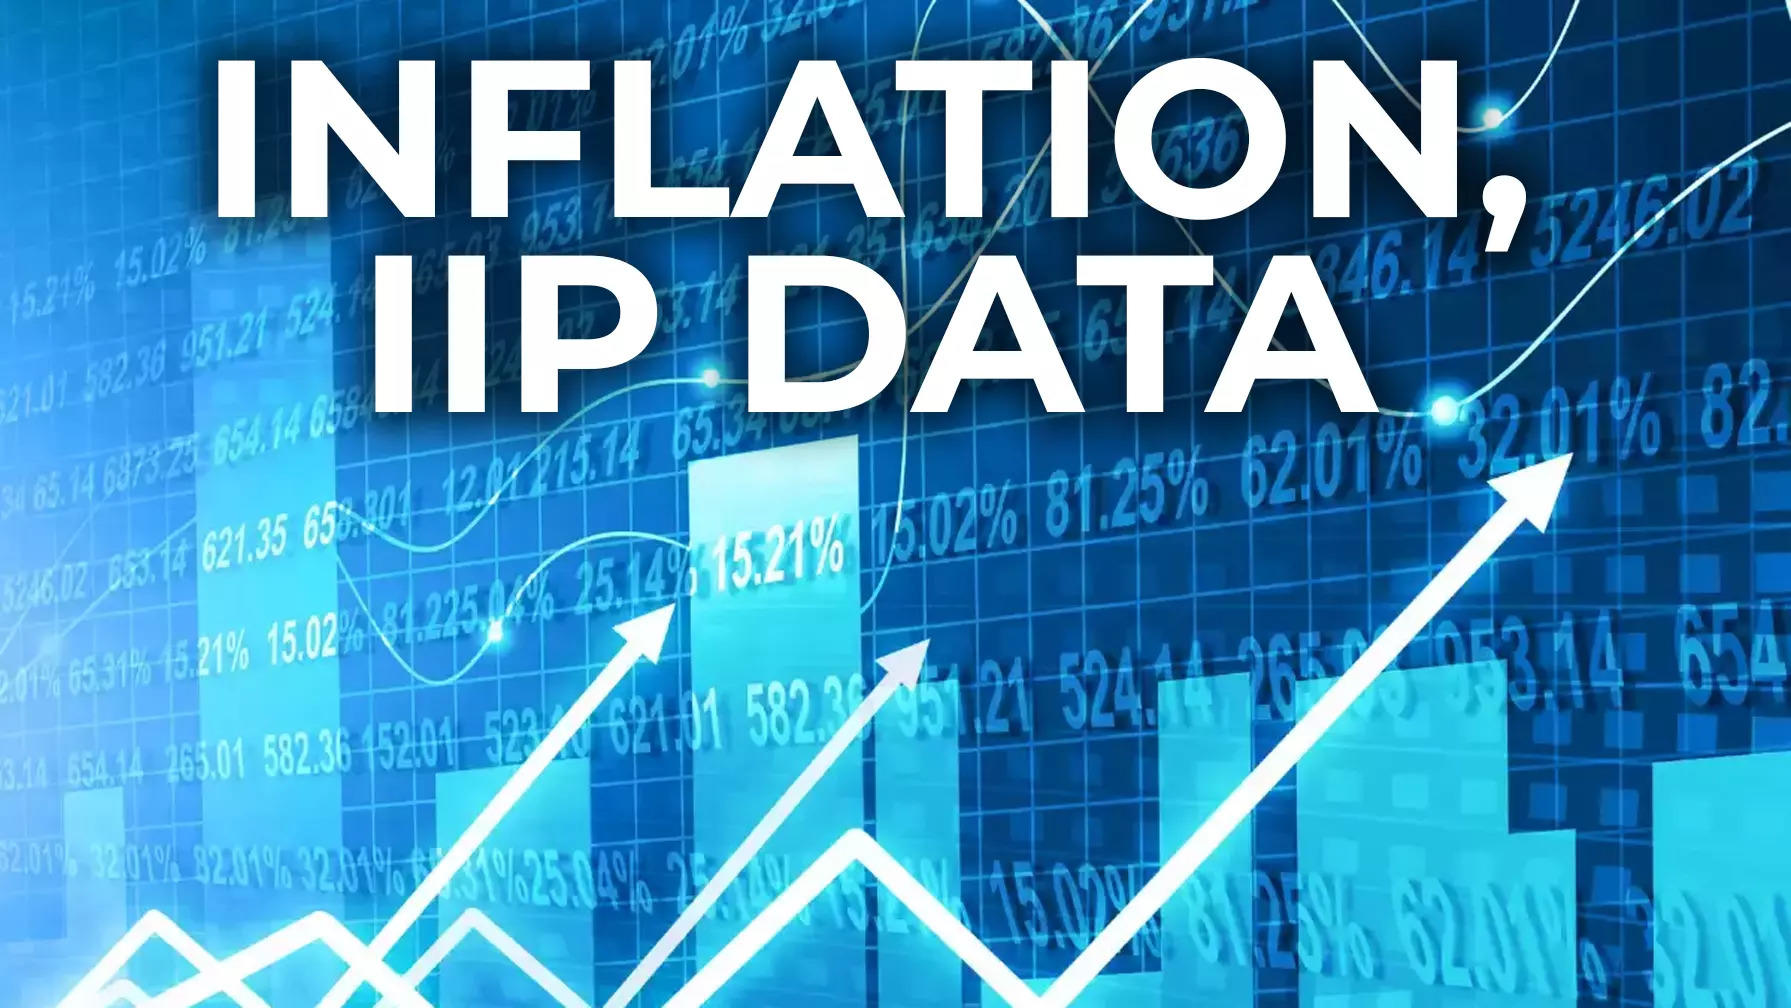 March CPI inflation eases to 4.85% versus 5.09% in February